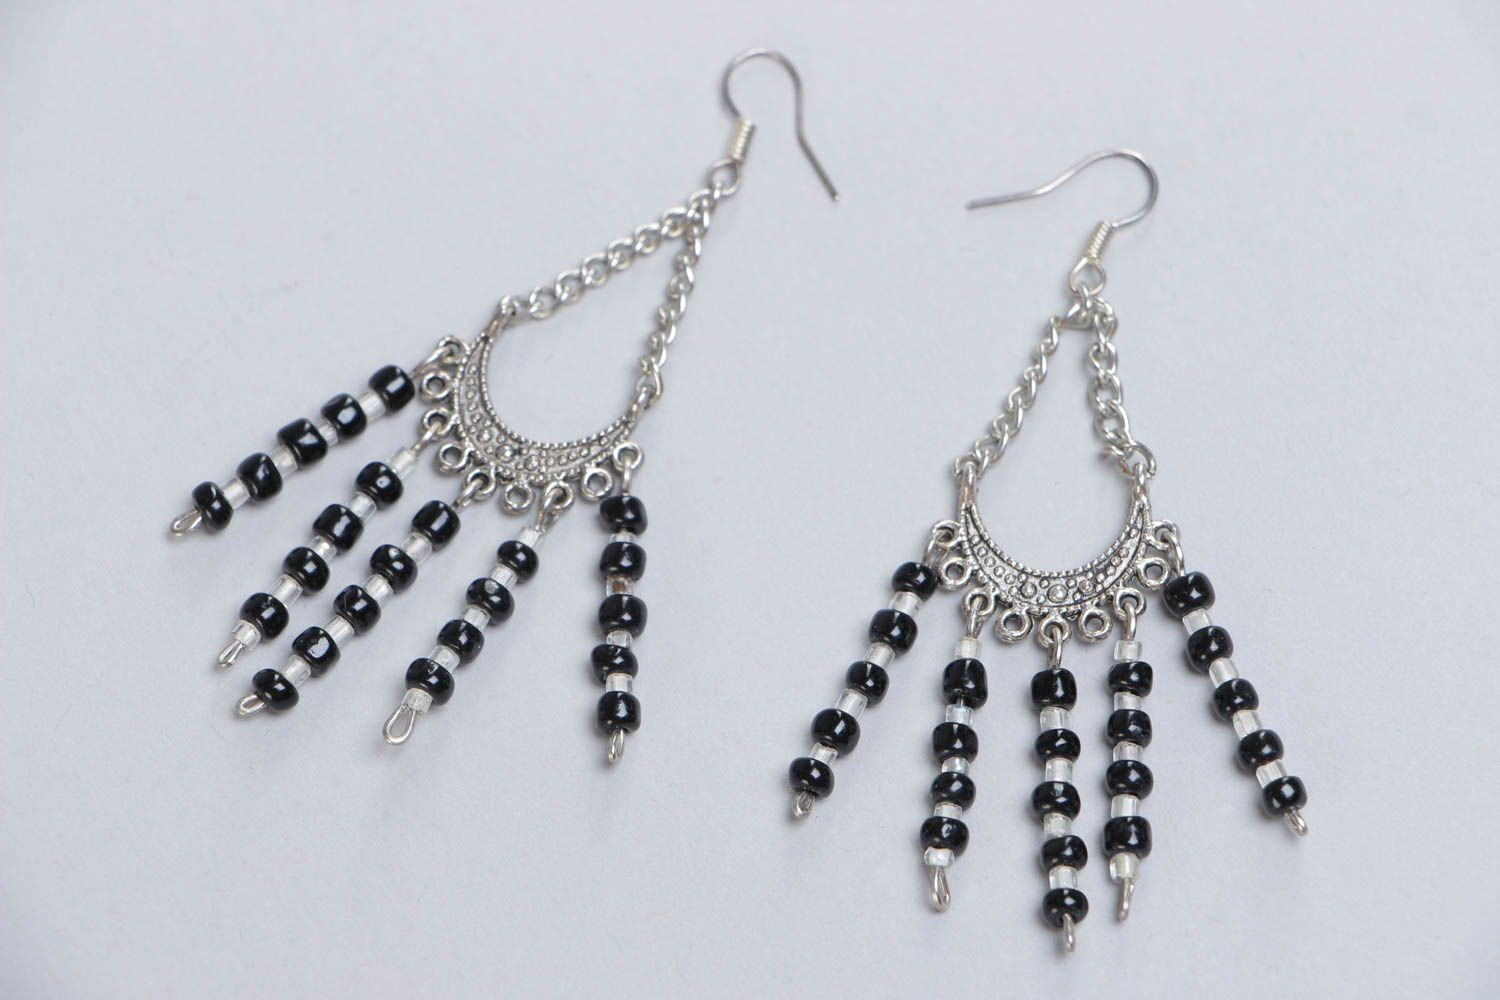 Handmade stylish long metal earrings with beads black-and-white summer accessory photo 2